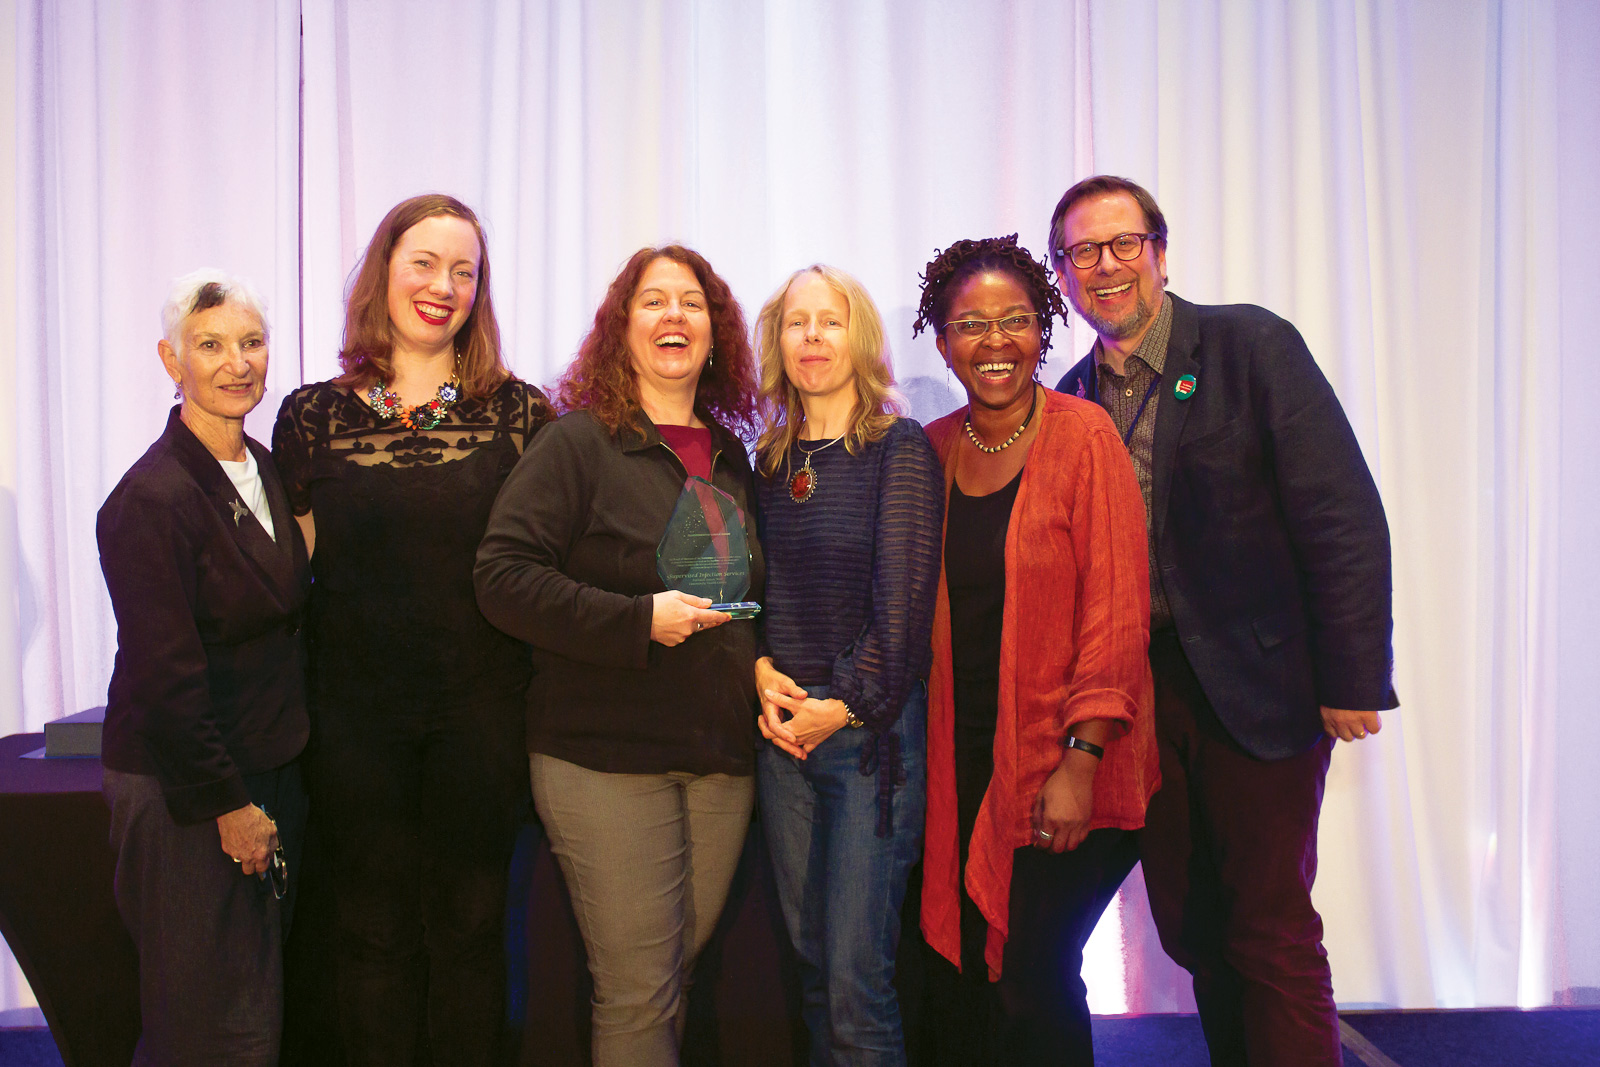 Upon accepting the Transformative Change Award received for work on Supervised Injection Services